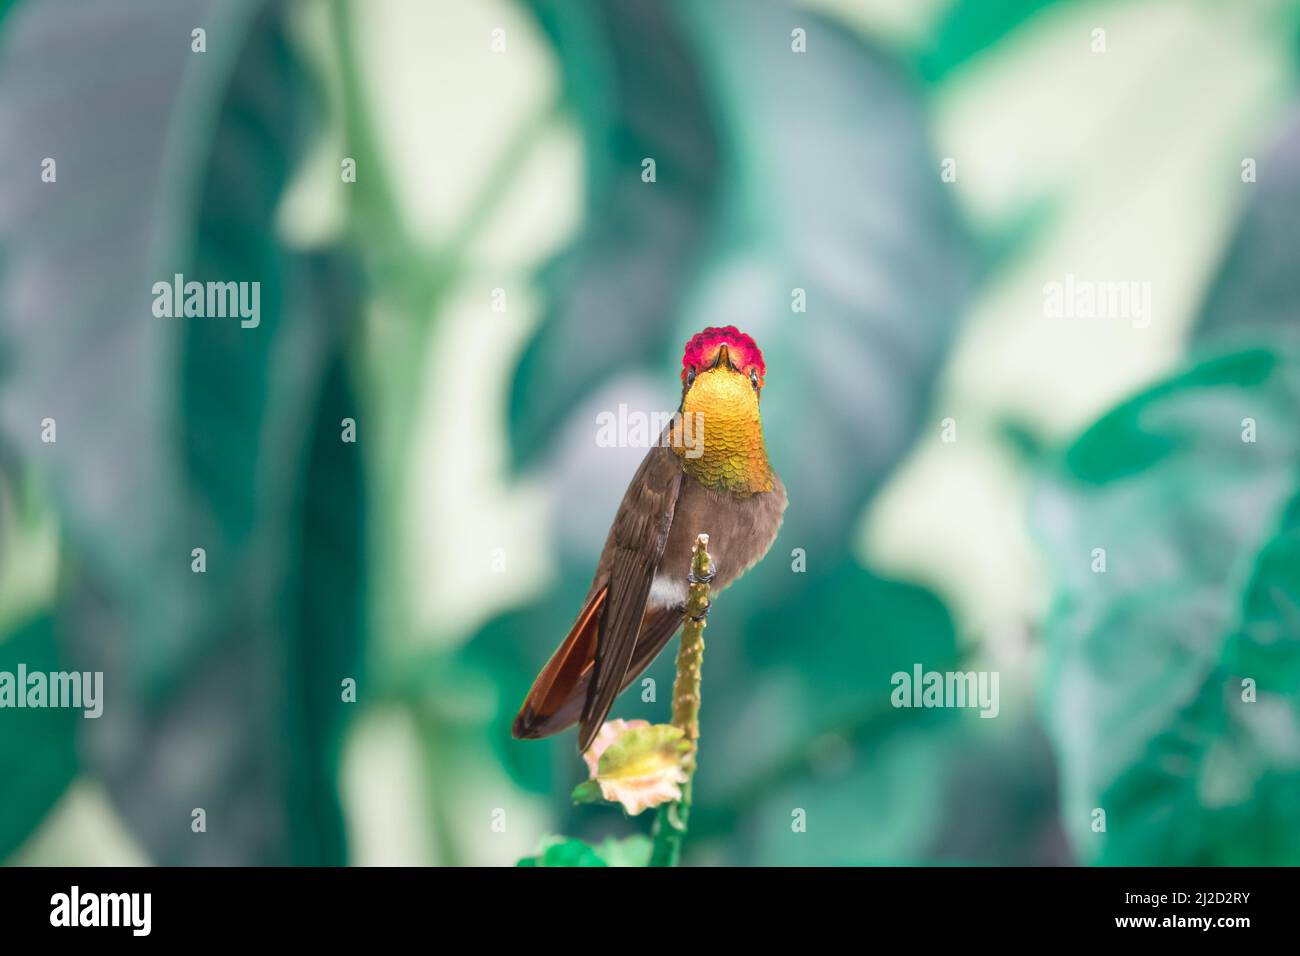 Vivid Ruby Topaz hummingbird, Chrysolampis mosquitus, perched on a branch looking at camera with glittering gold and red feathers. Stock Photo